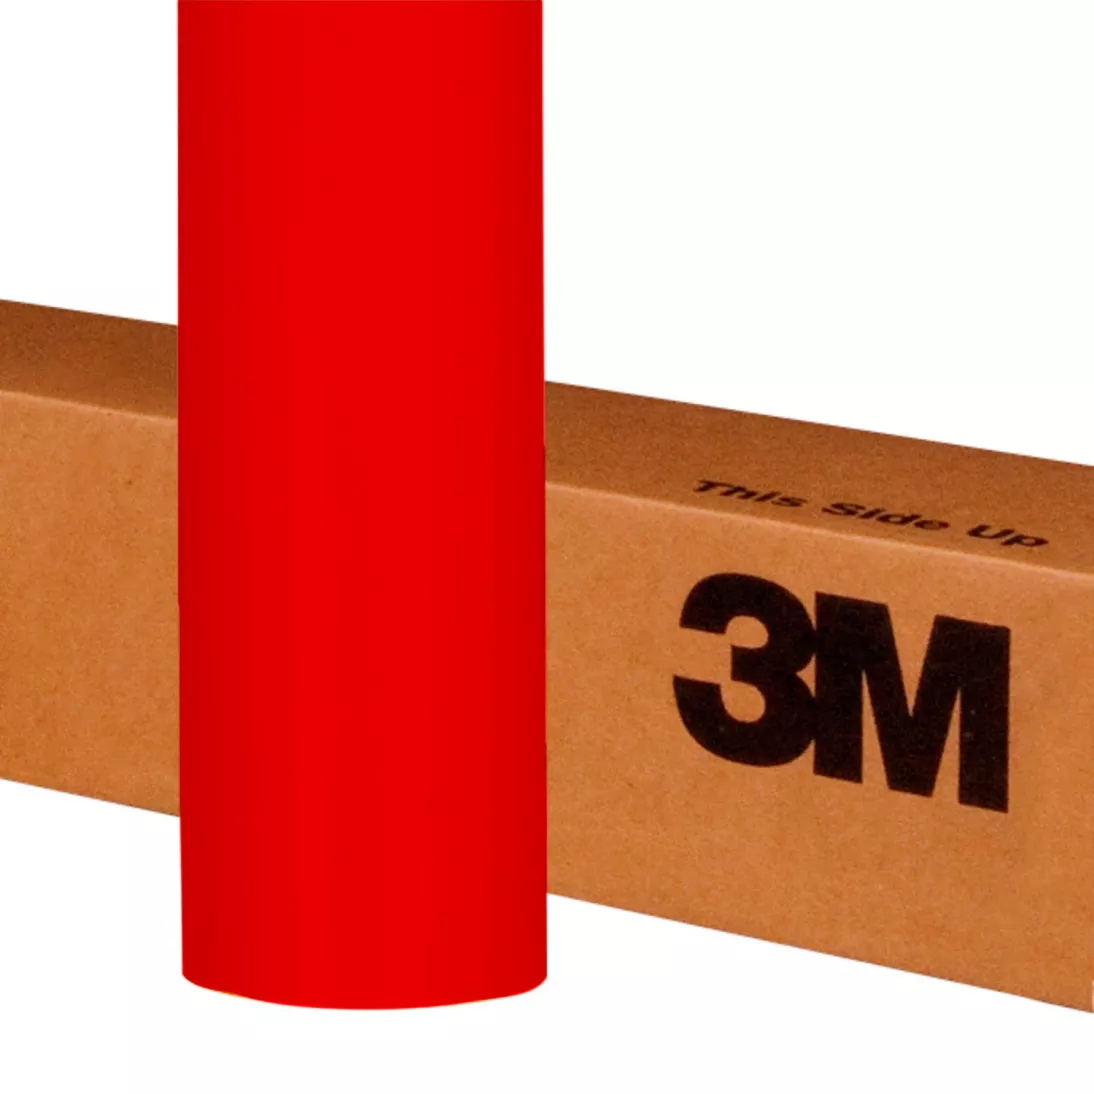 3M™ Scotchcal™ ElectroCut™ Graphic Film 7725-293, Atomic Red, 48 in x 50
yd